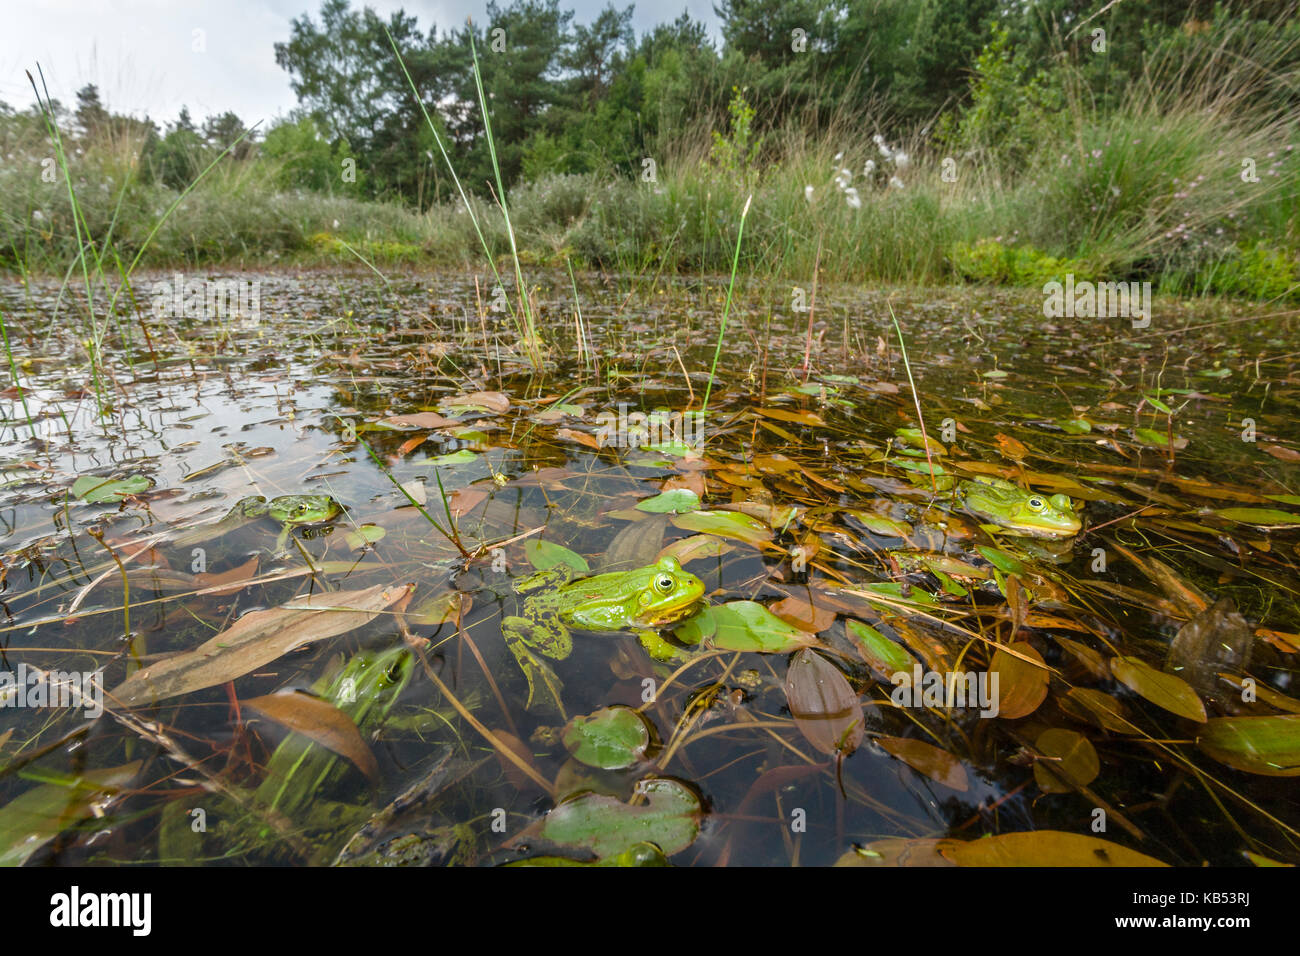 Group of Pool Frogs (Rana lessonae) in pond with Floating Pondweed (Potamogeton natans), The Netherlands, Overijssel, Beerzerveld Stock Photo